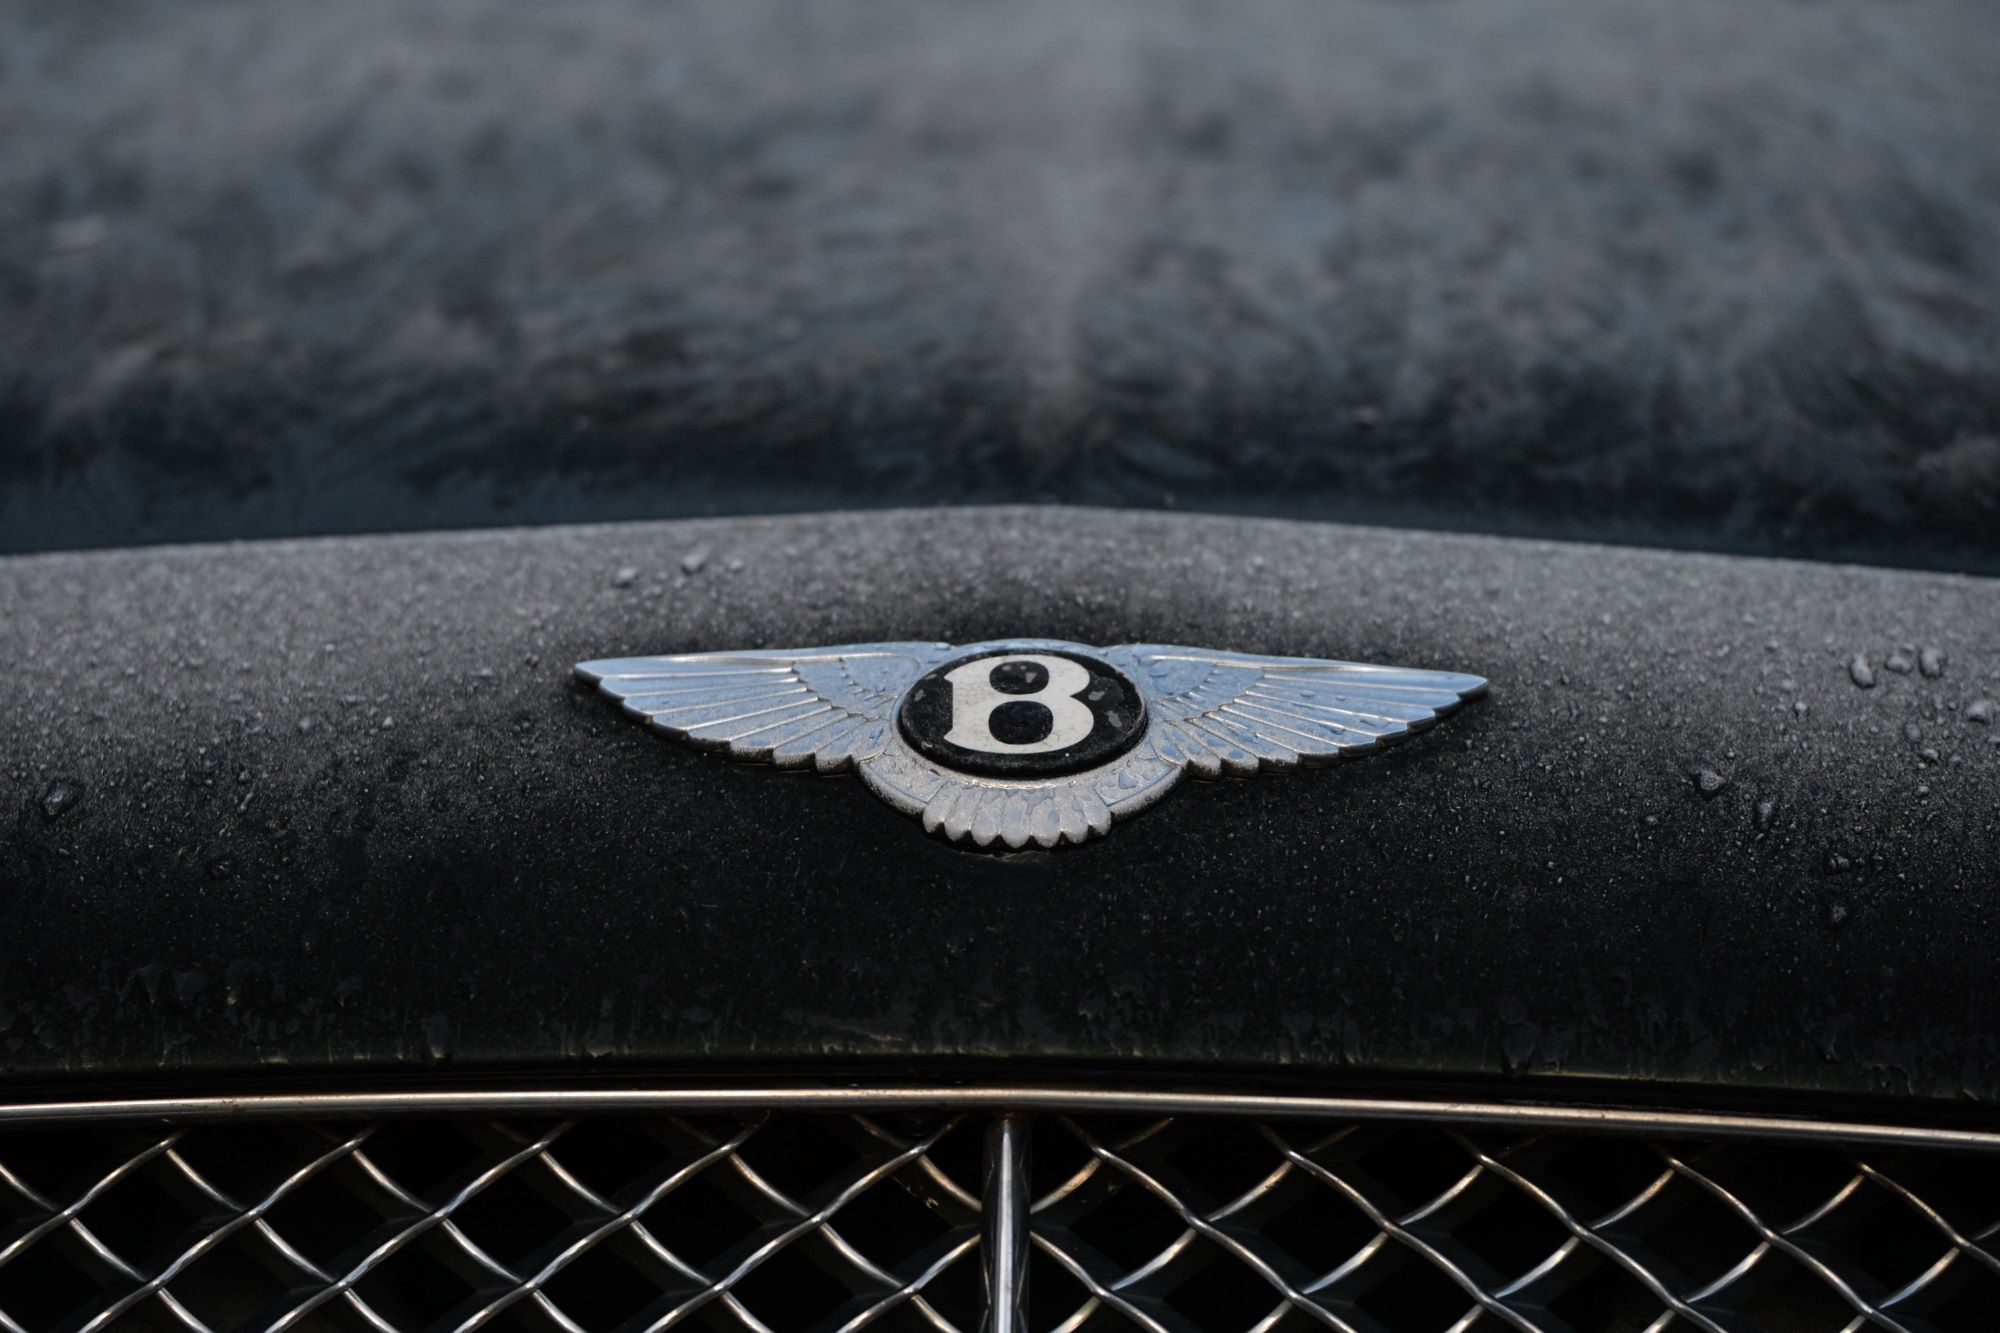 A Bentley logo on a black car, that may require a different license in Europe to drive.